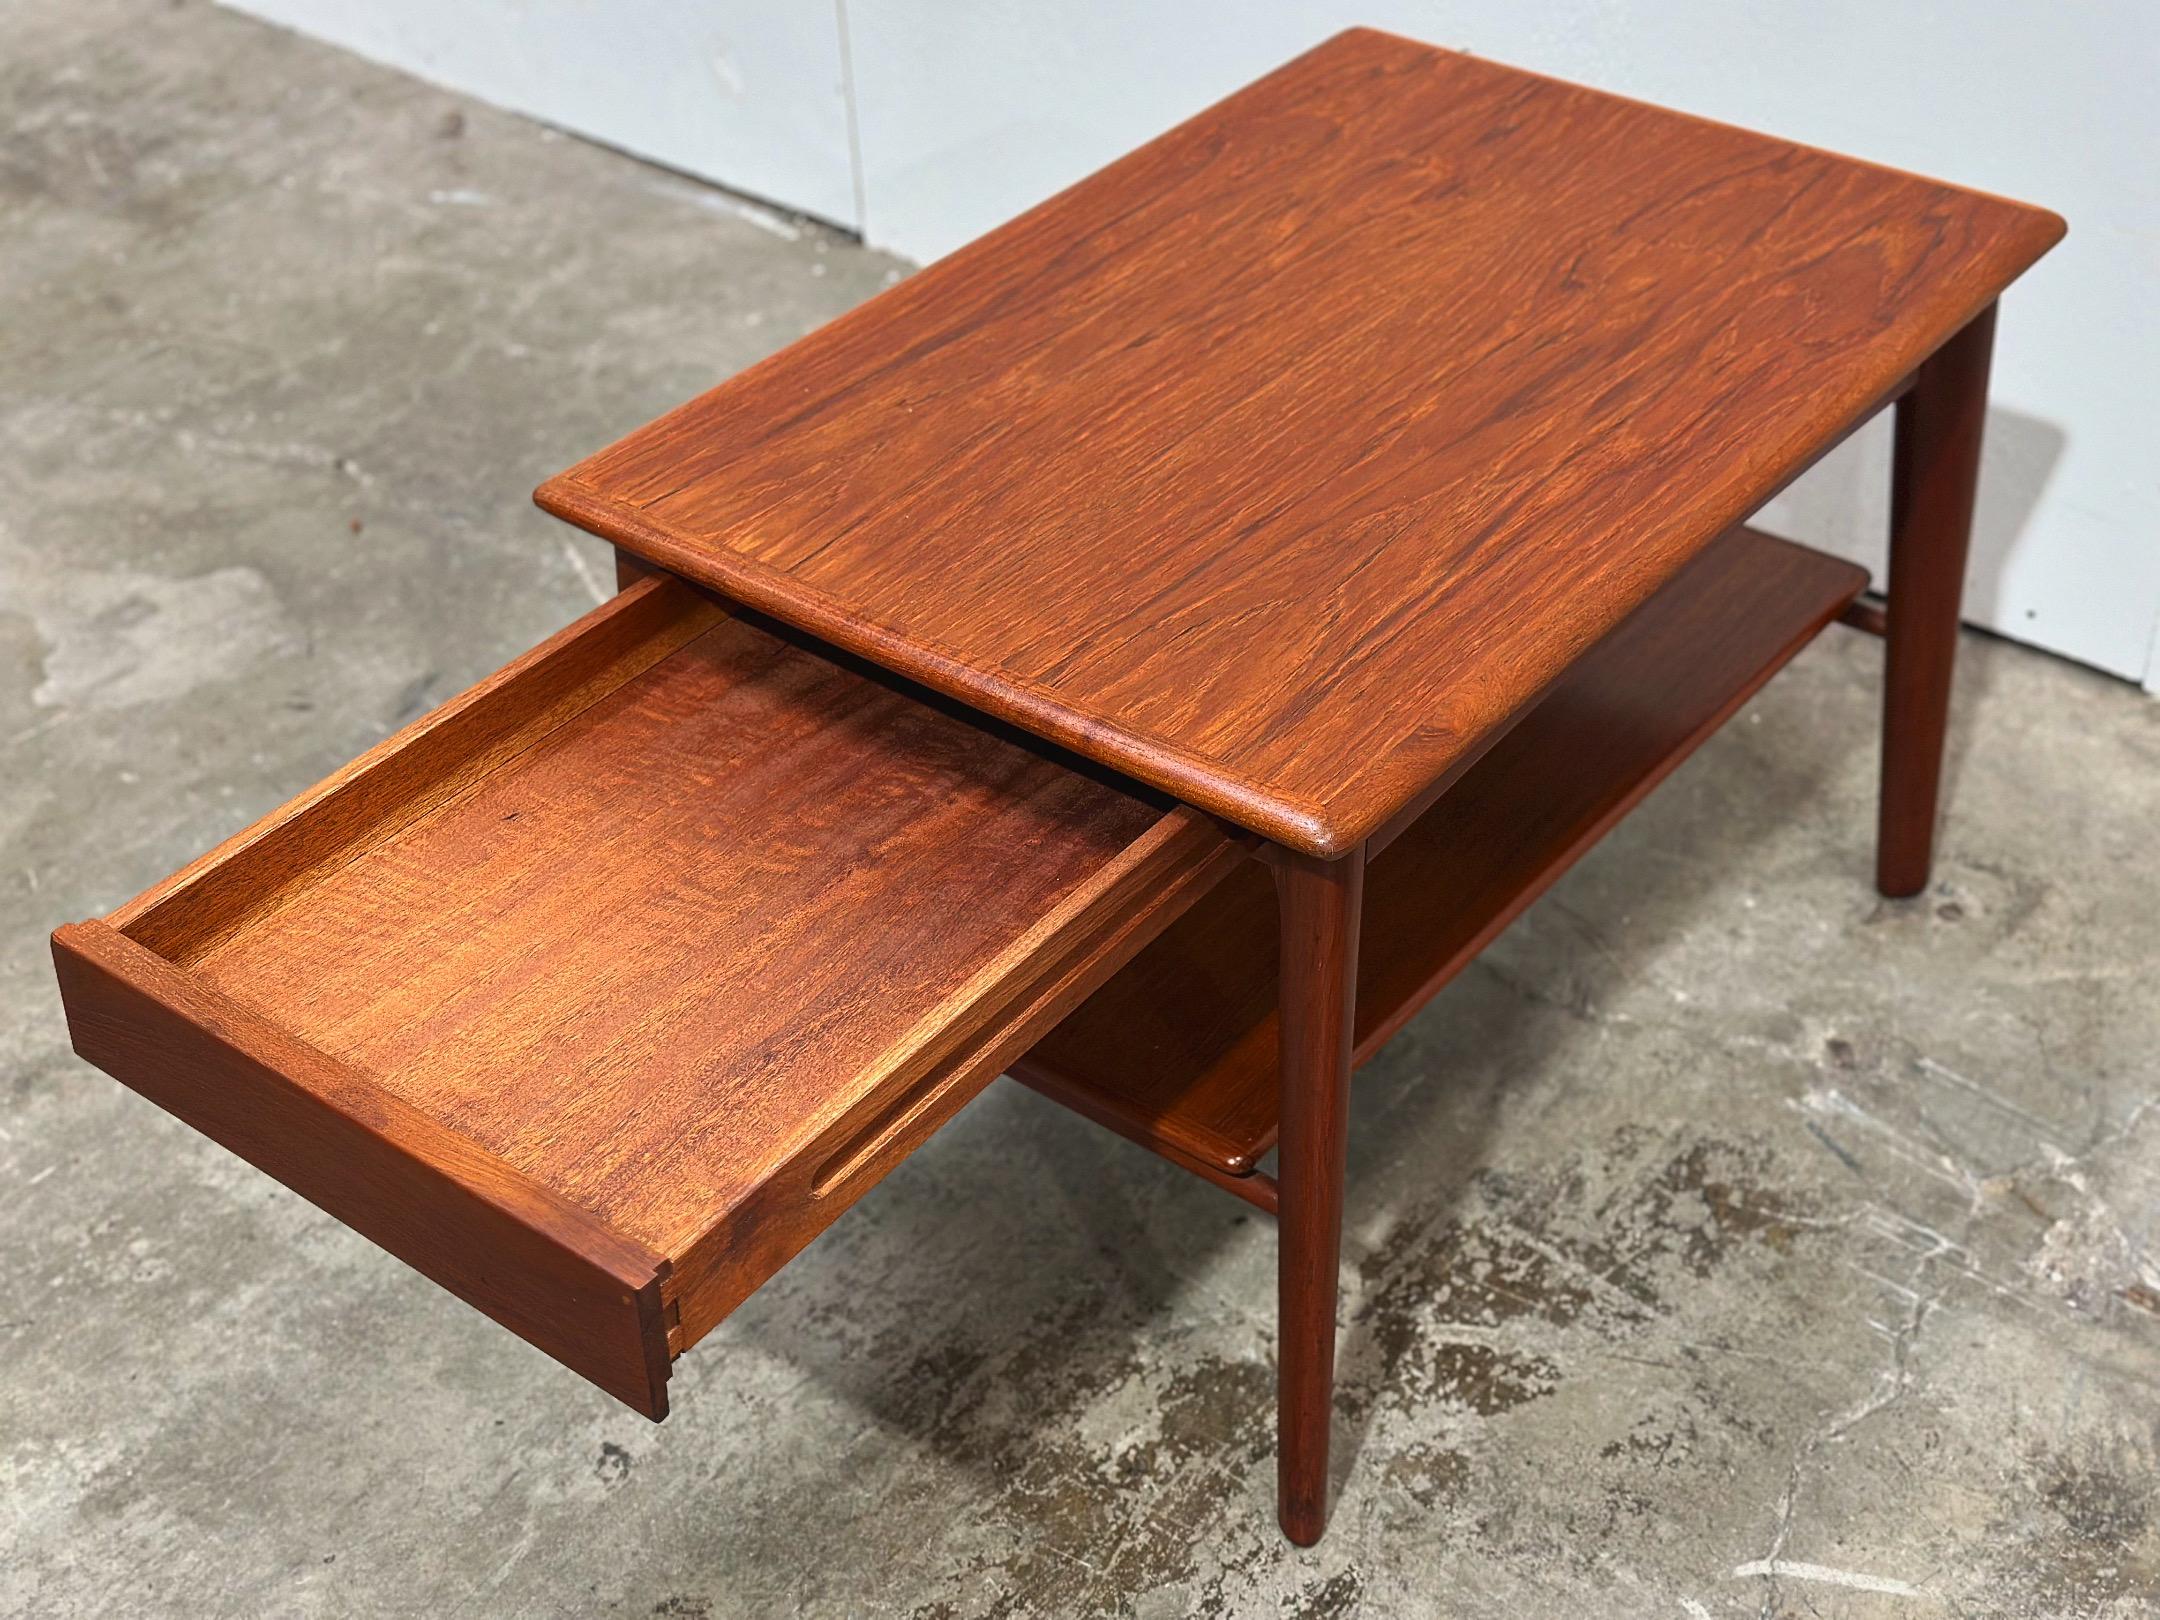 Midcentury Danish Modern Side End Table - Svend Age Madsen for Karl Lindegaard In Good Condition For Sale In Decatur, GA